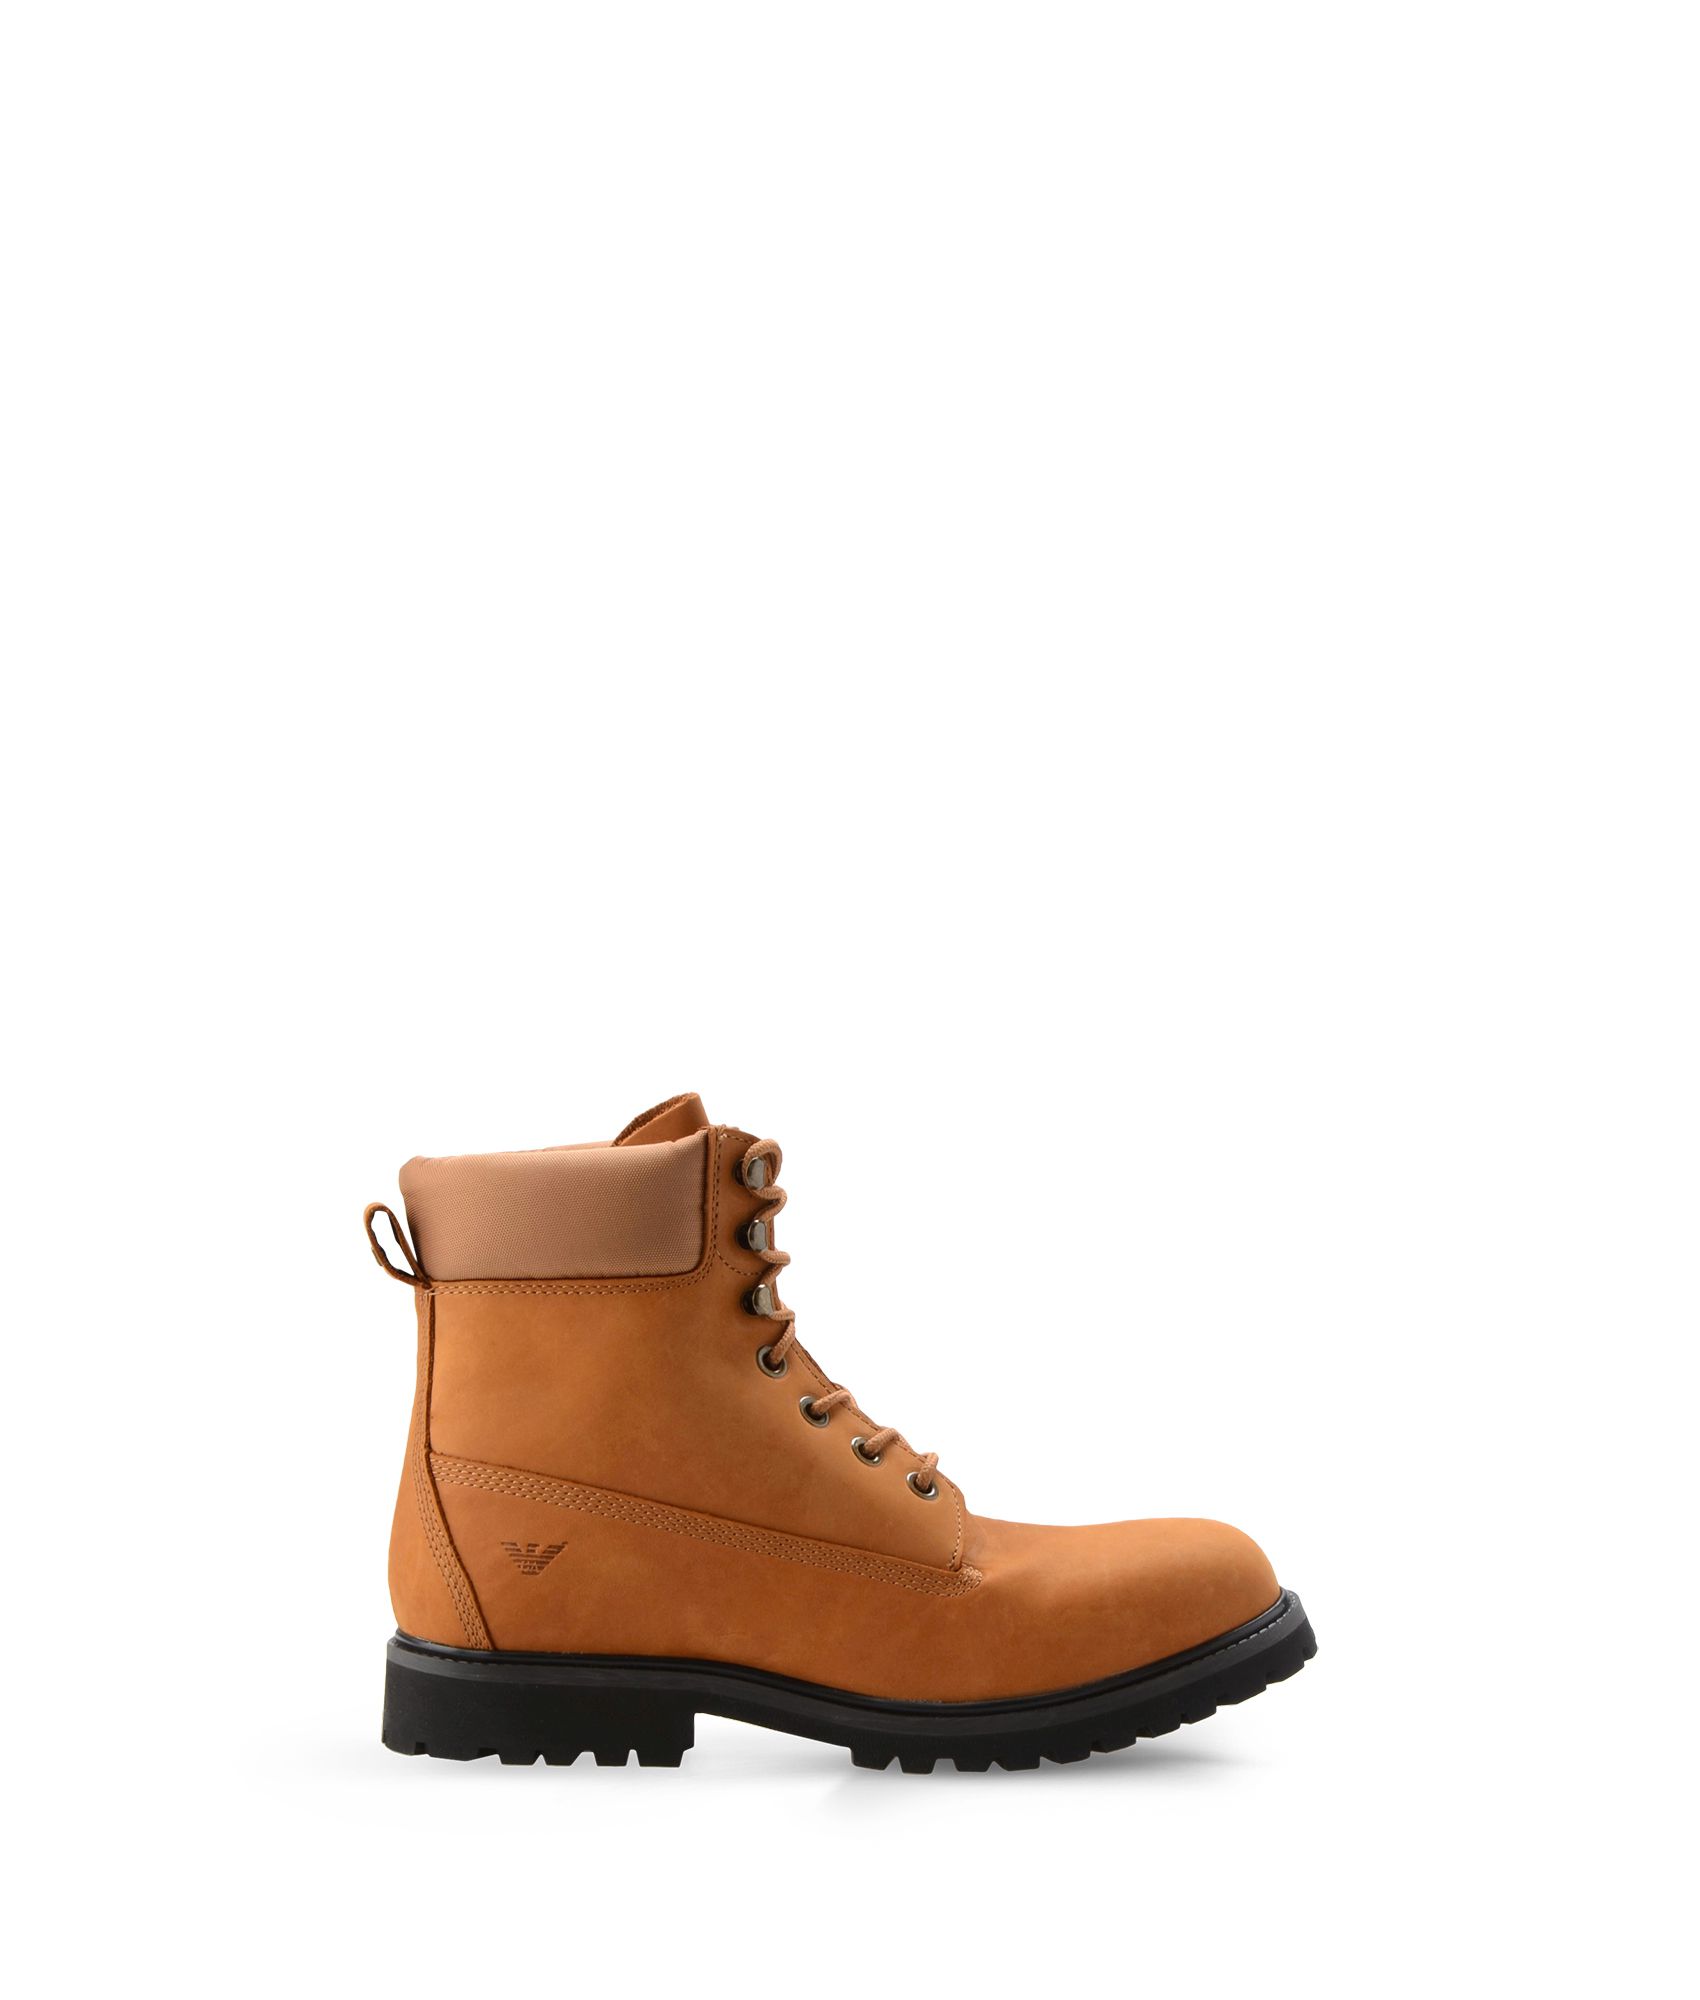 Lyst - Armani Jeans Combat Boots in Brown for Men